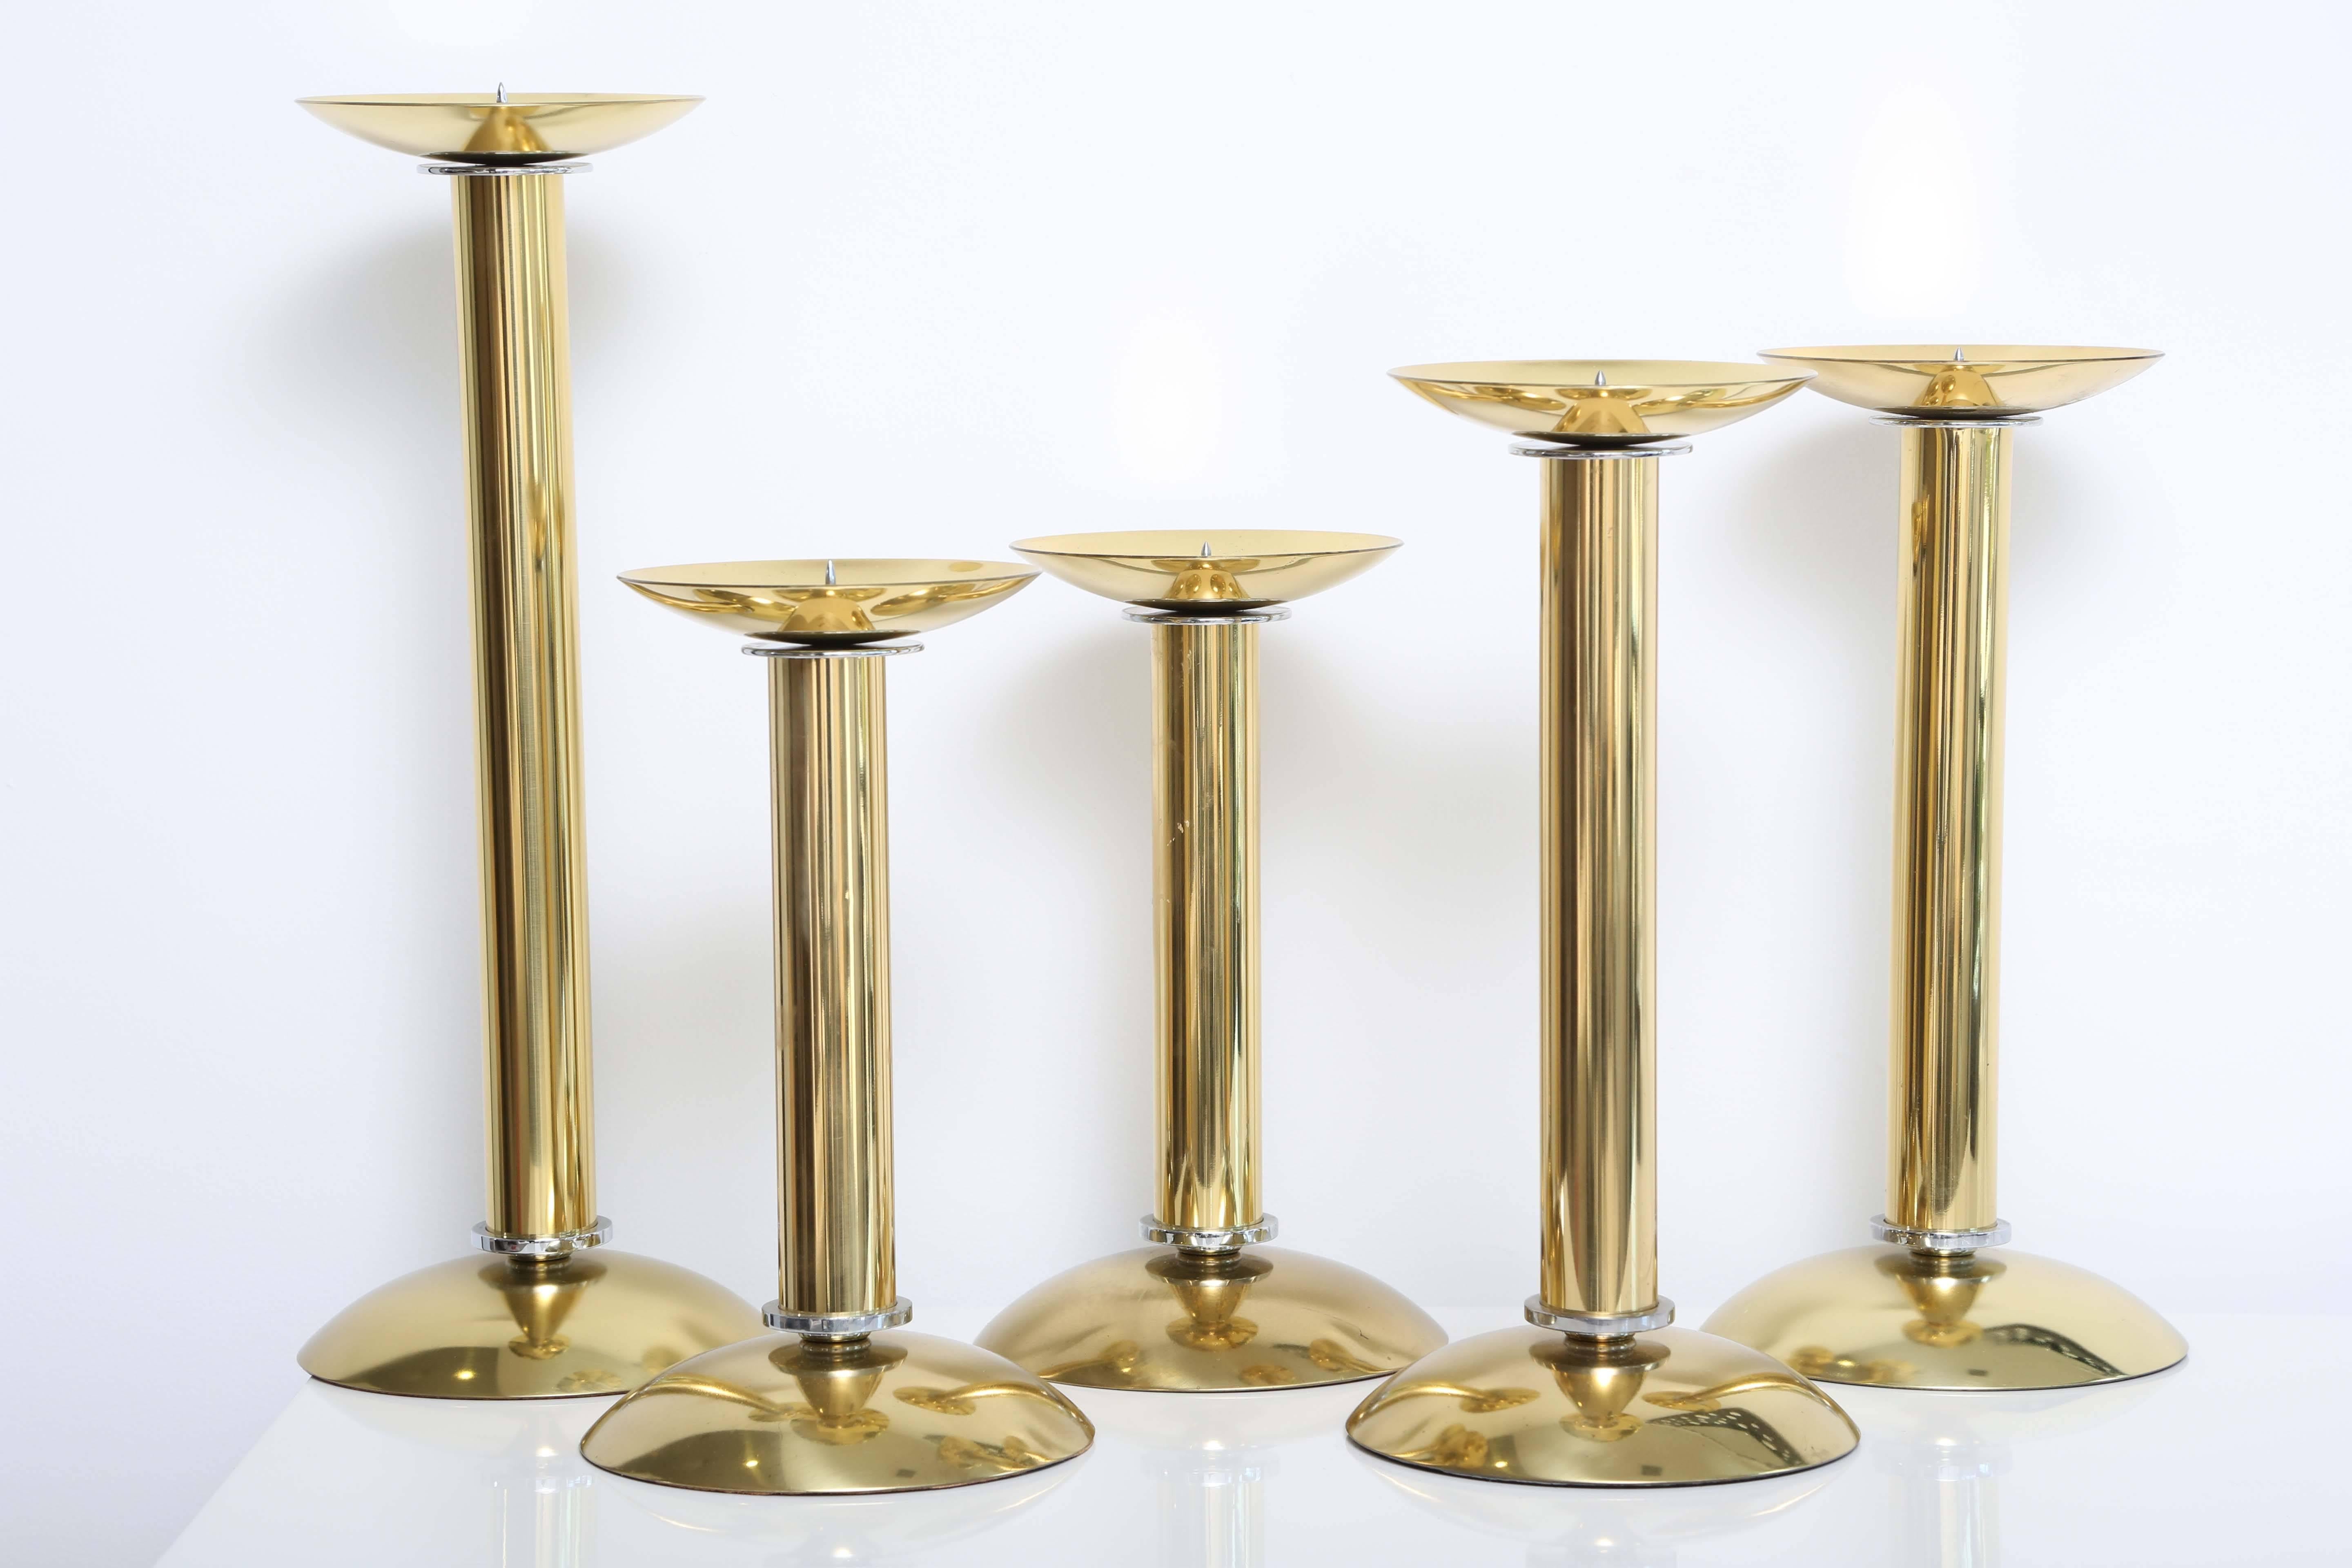 Group of five Karl Springer two-tone brass and steel candlesticks of various heights.
Various heights:
tallest 19.75 x 6.25
2- 15.75 x 6.5
2- 13 x 6.25.